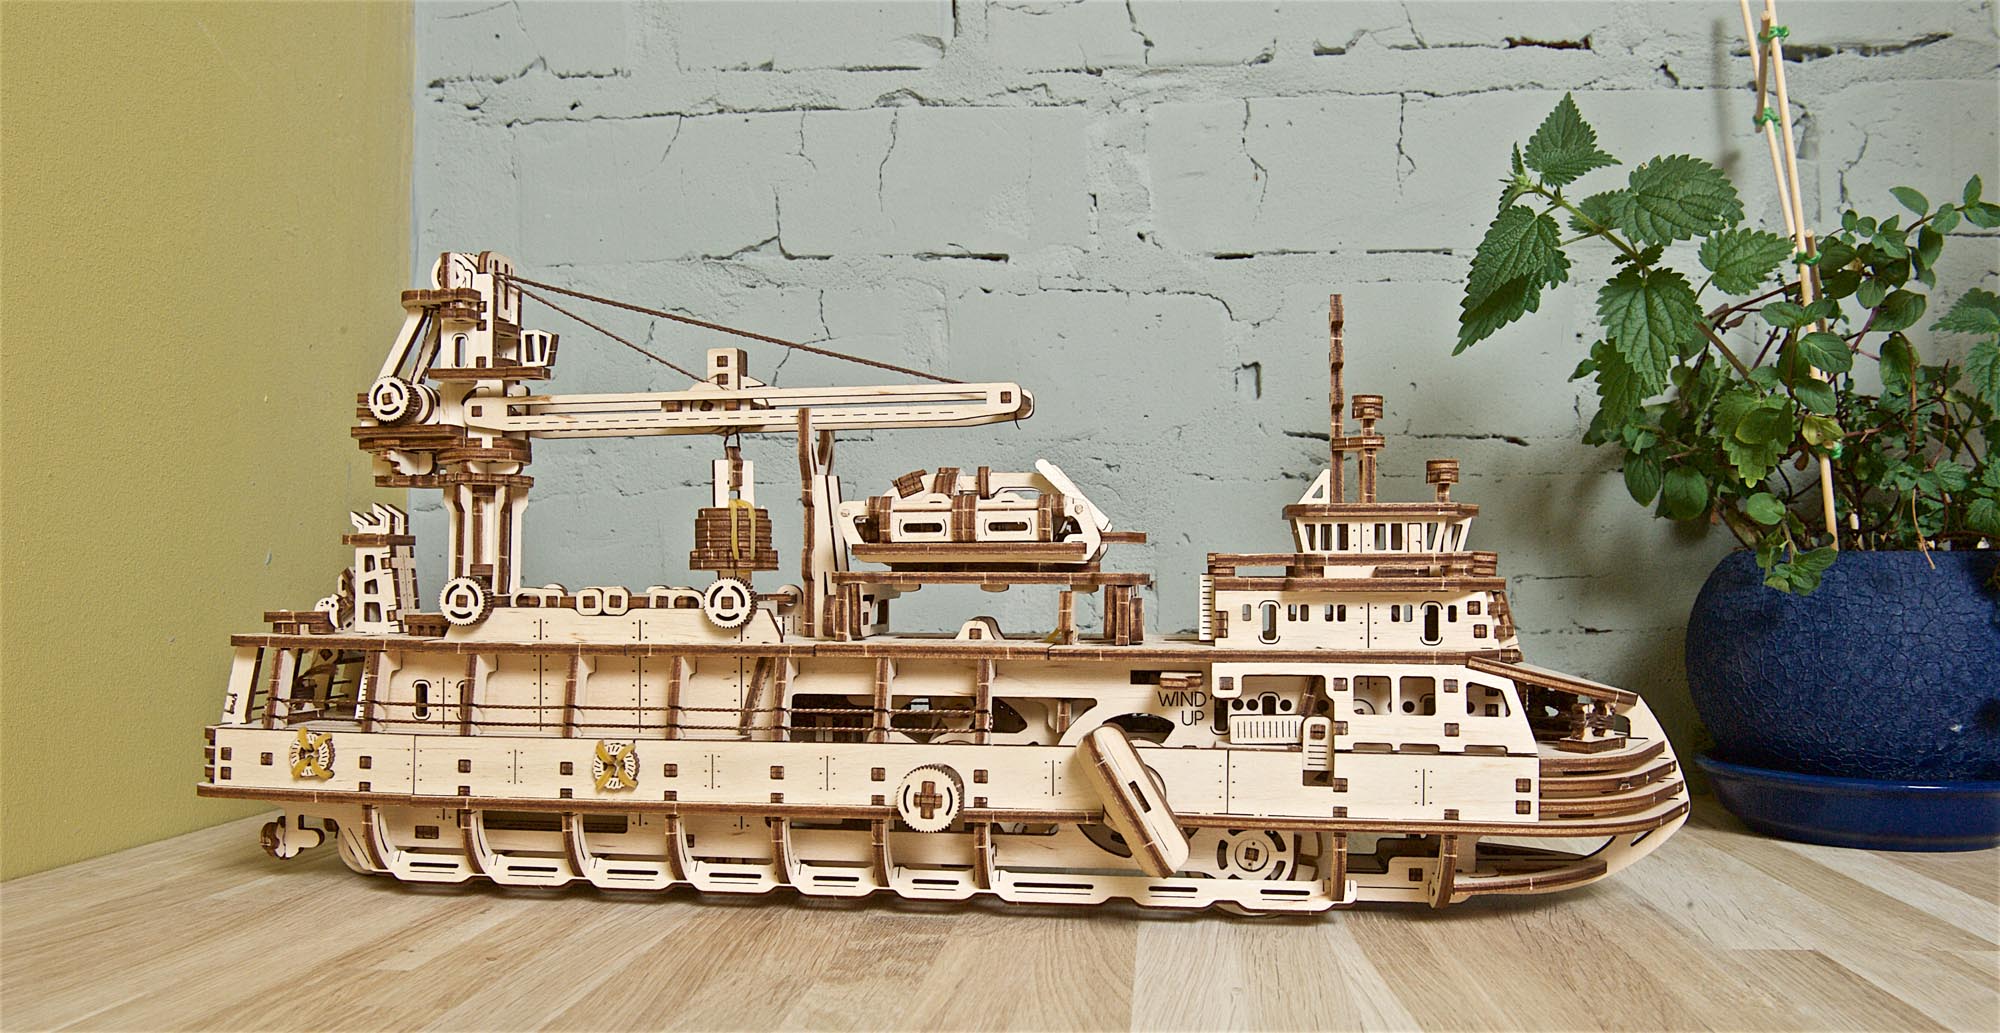 Buy Modeling Tools: How to Build a Ship Model Made of Wood (Part II)